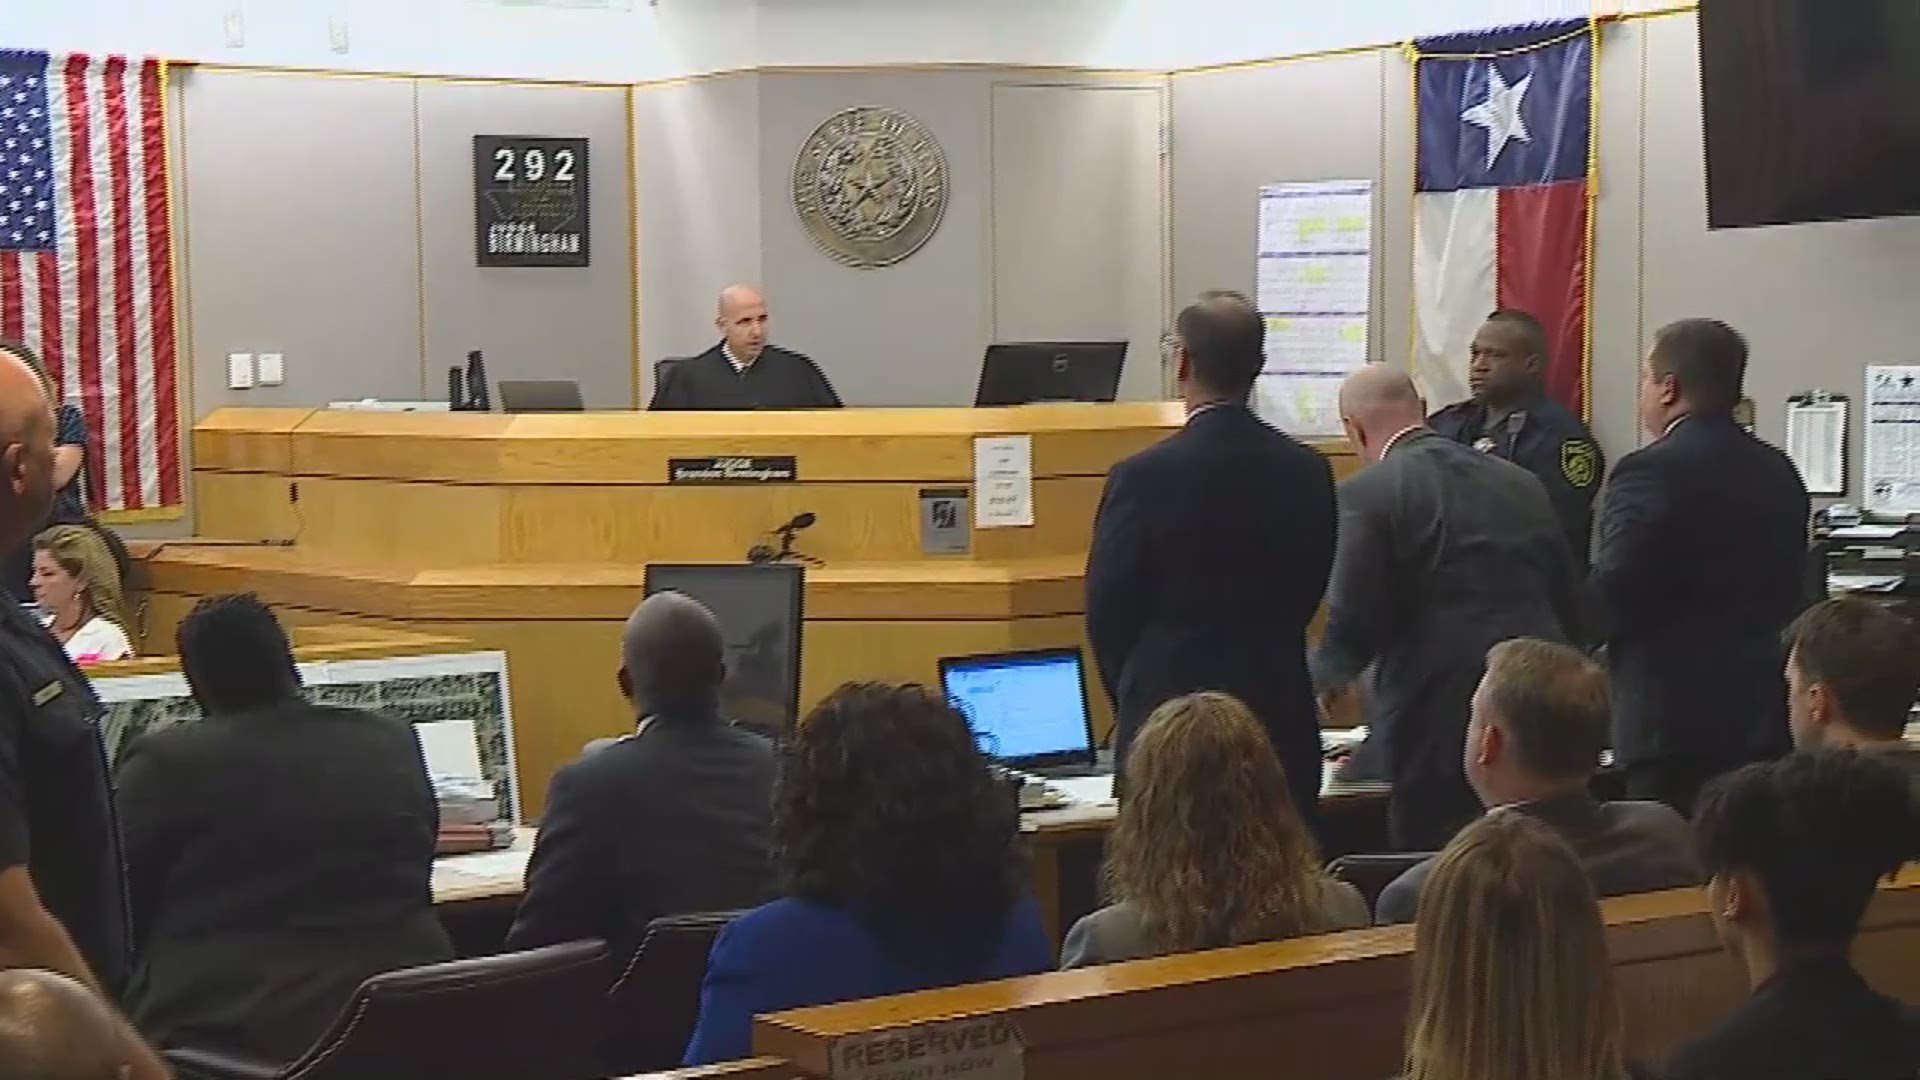 Judge Brandon Birmingham reads a guilty verdict for Roy Oliver, the former officer on trial for the shooting death of Jordan Edwards.